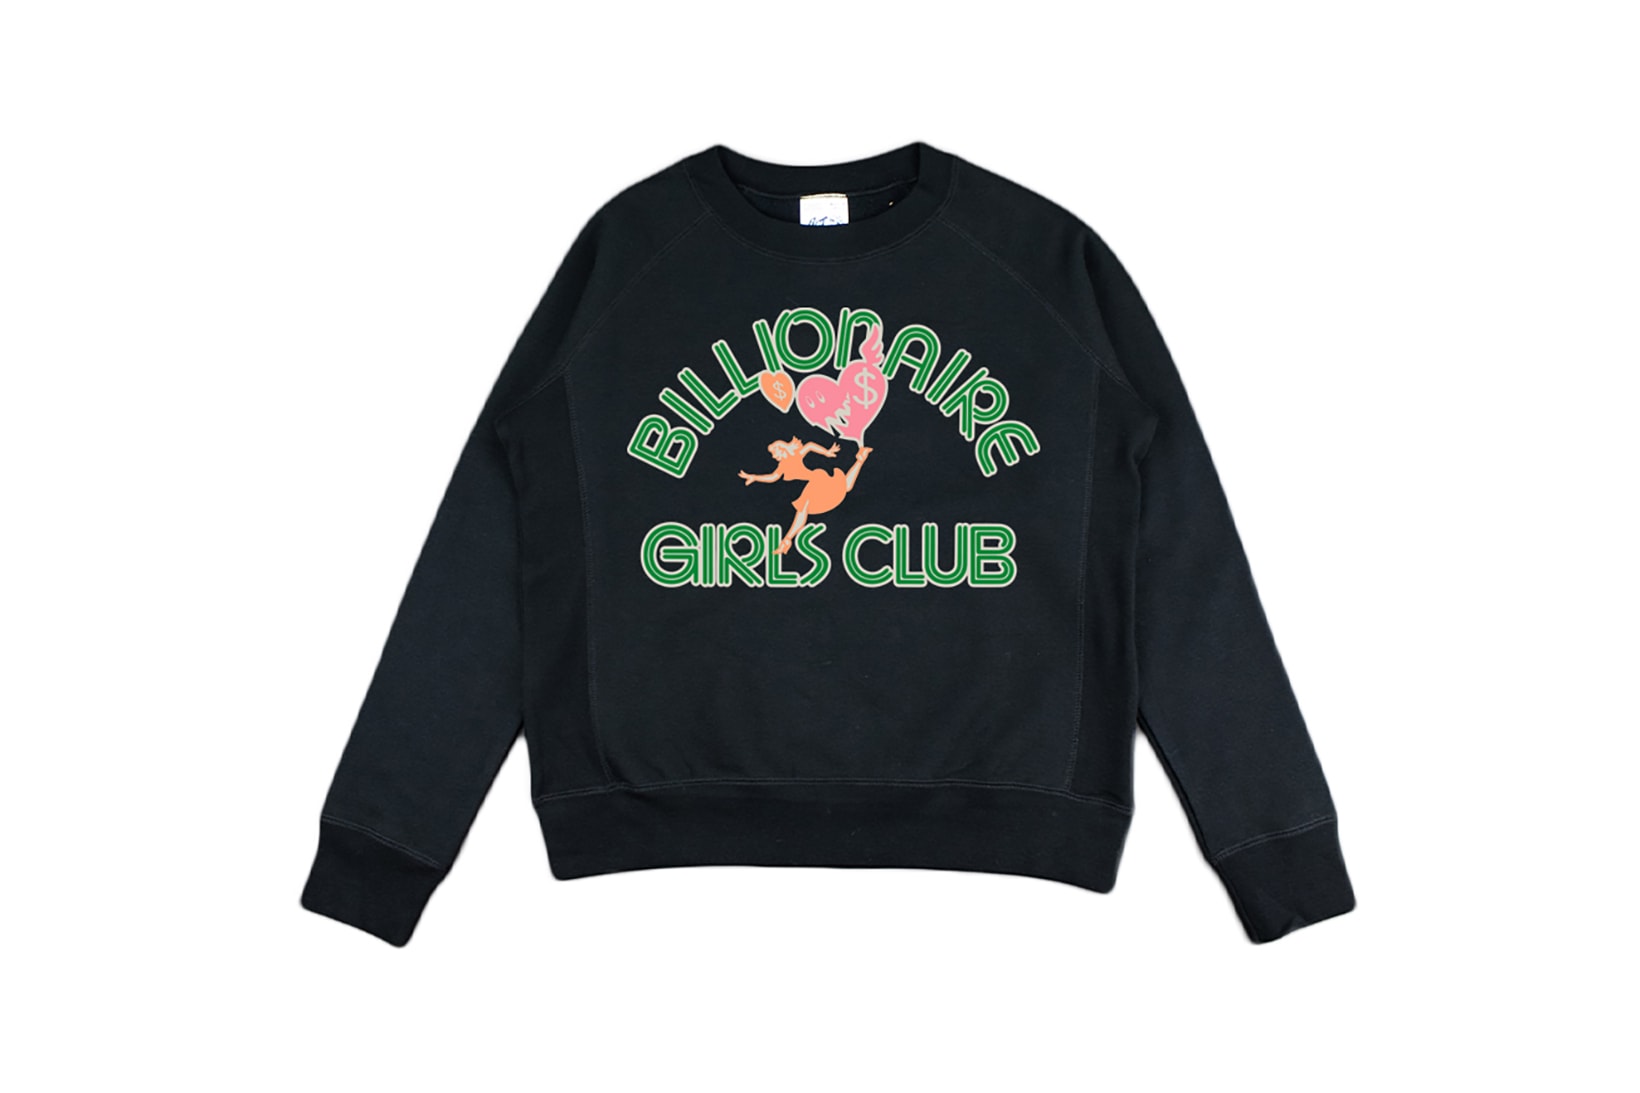 Billionaire Girls Club Relaunch Capsule Collection Sweater Black